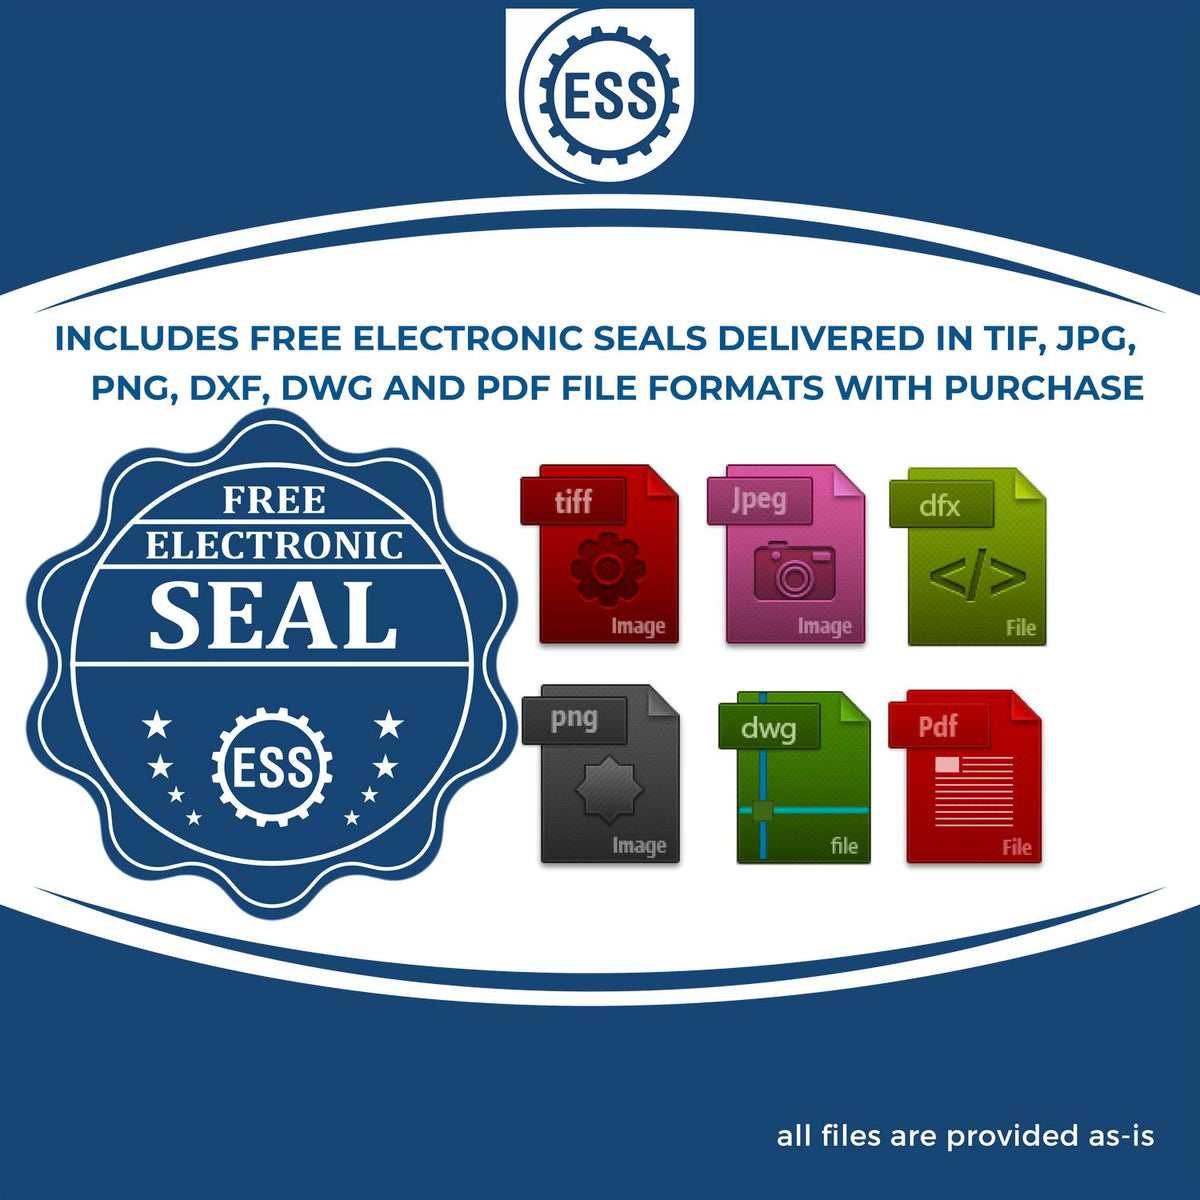 An infographic for the free electronic seal for the Slim Pre-Inked Indiana Professional Engineer Seal Stamp illustrating the different file type icons such as DXF, DWG, TIF, JPG and PNG.